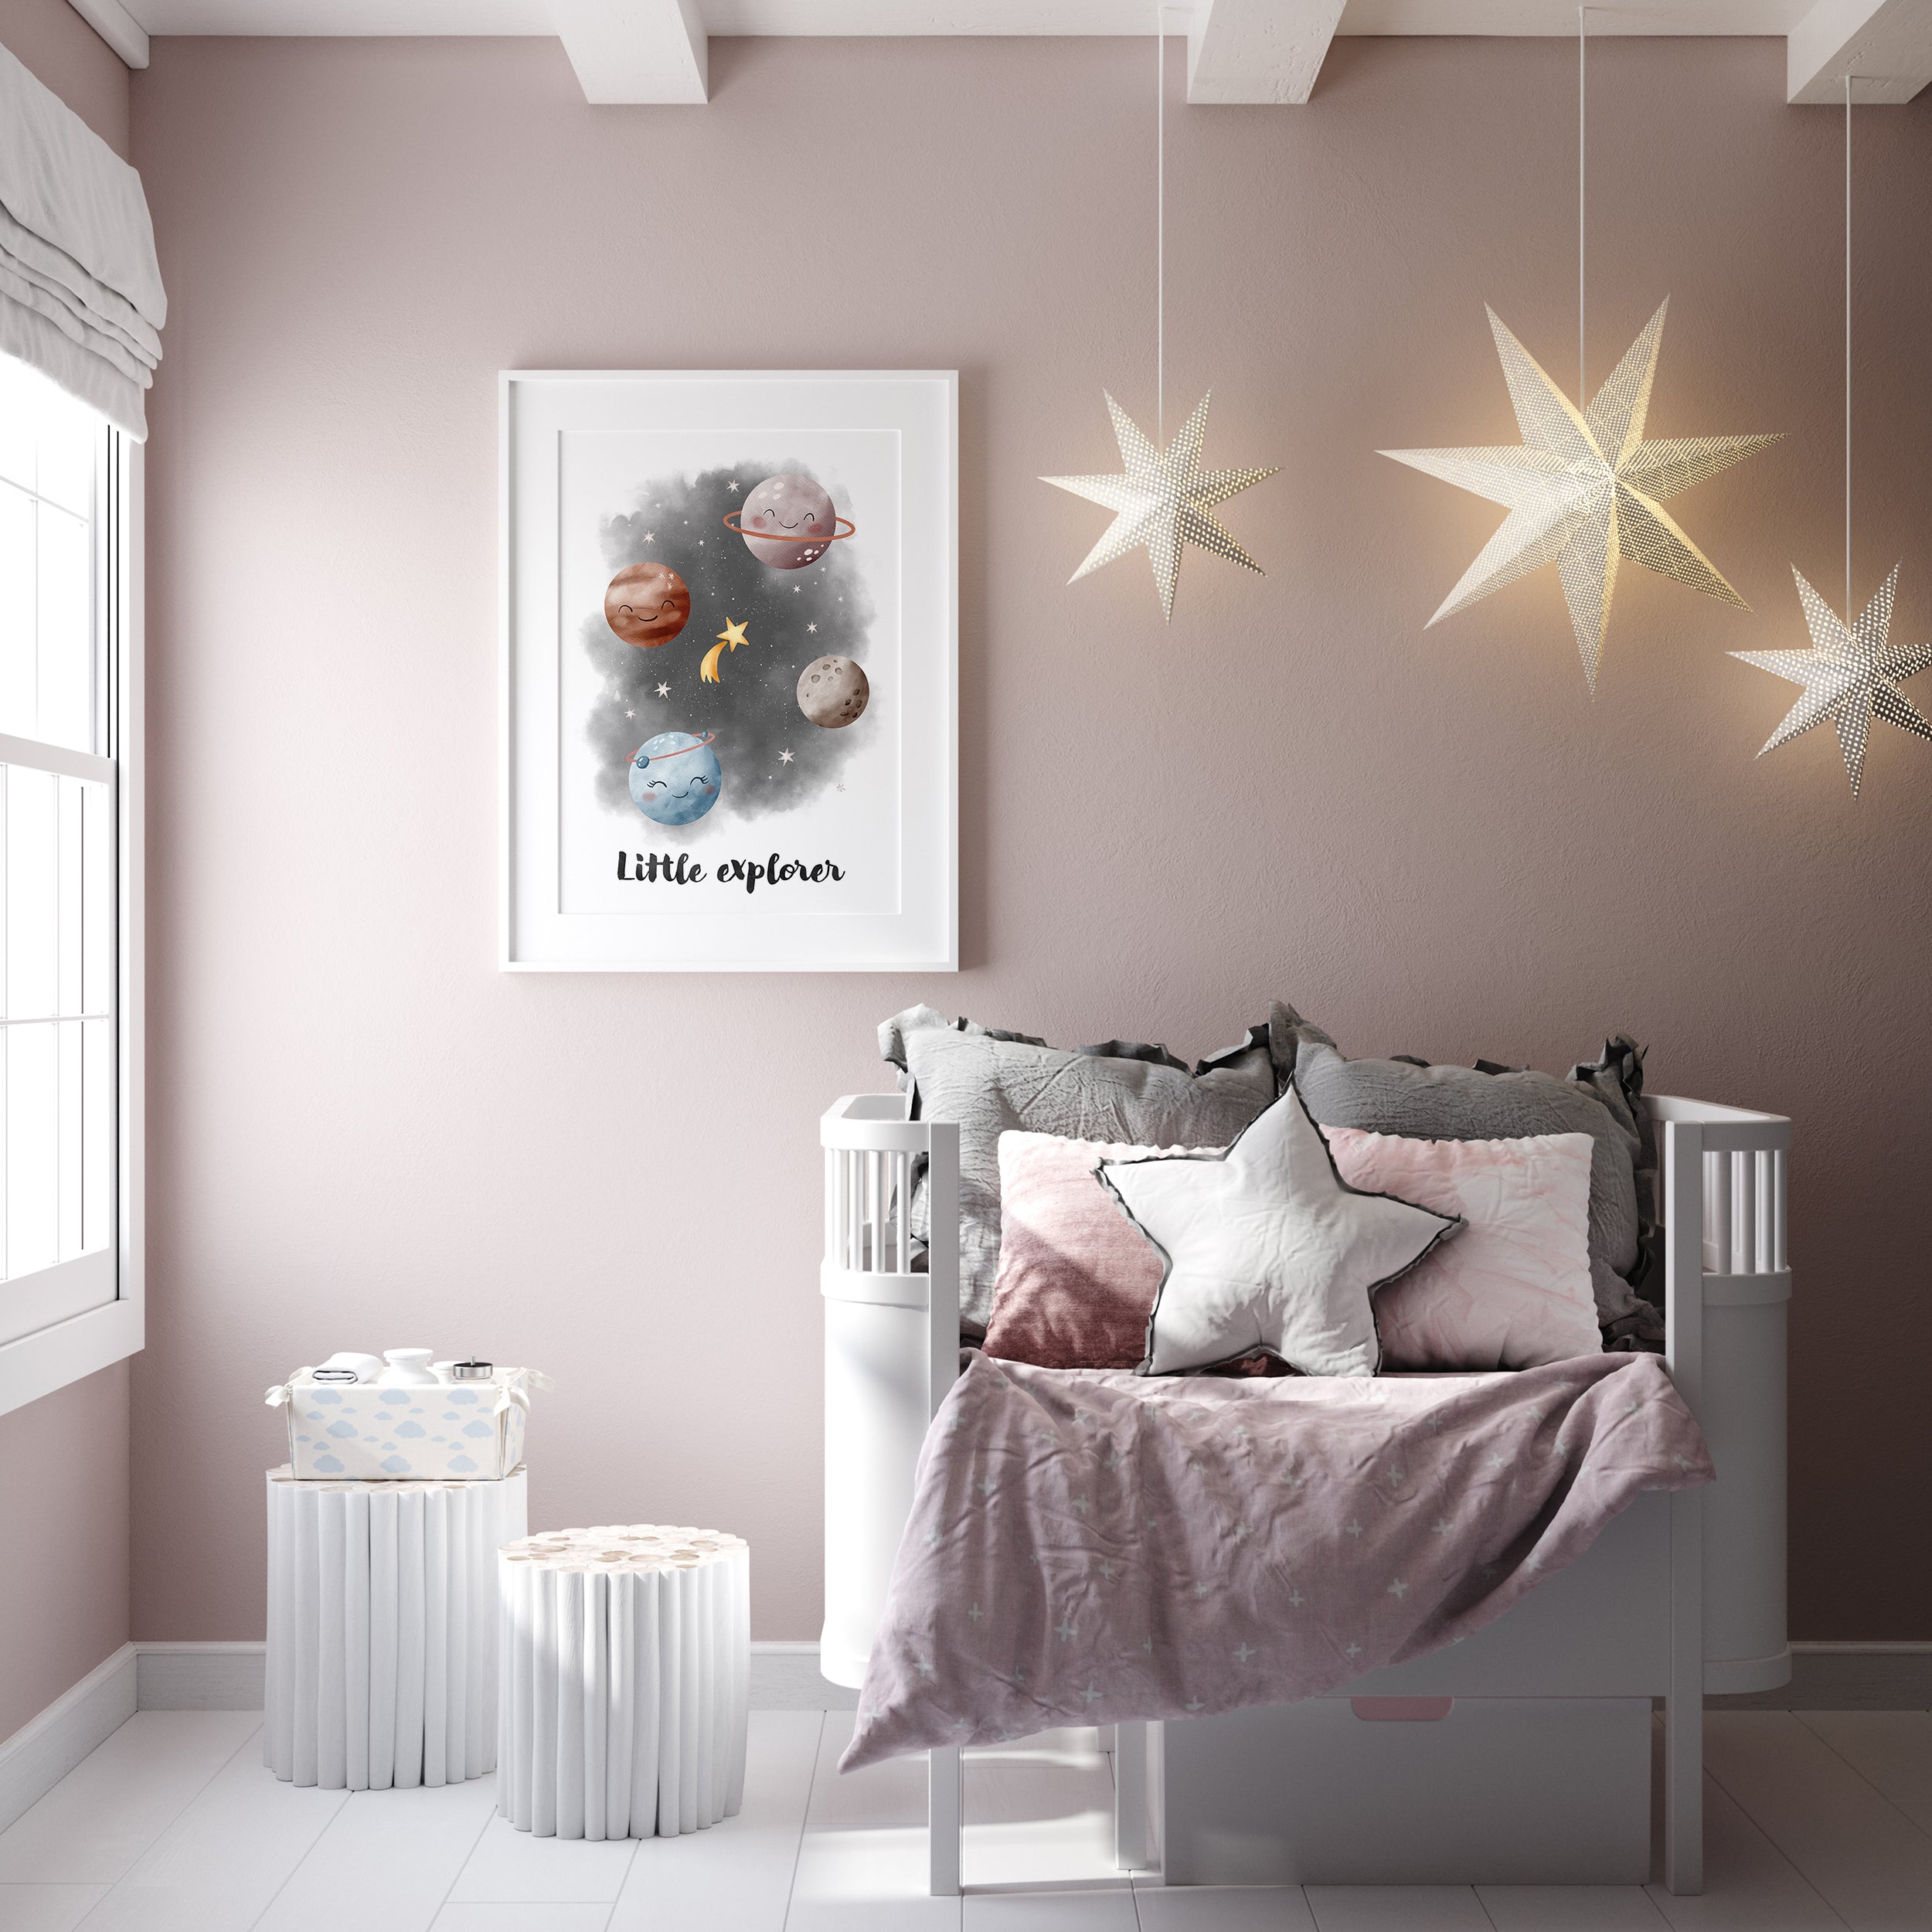 Planets and Space, Little Explorer Nursery Wall Art